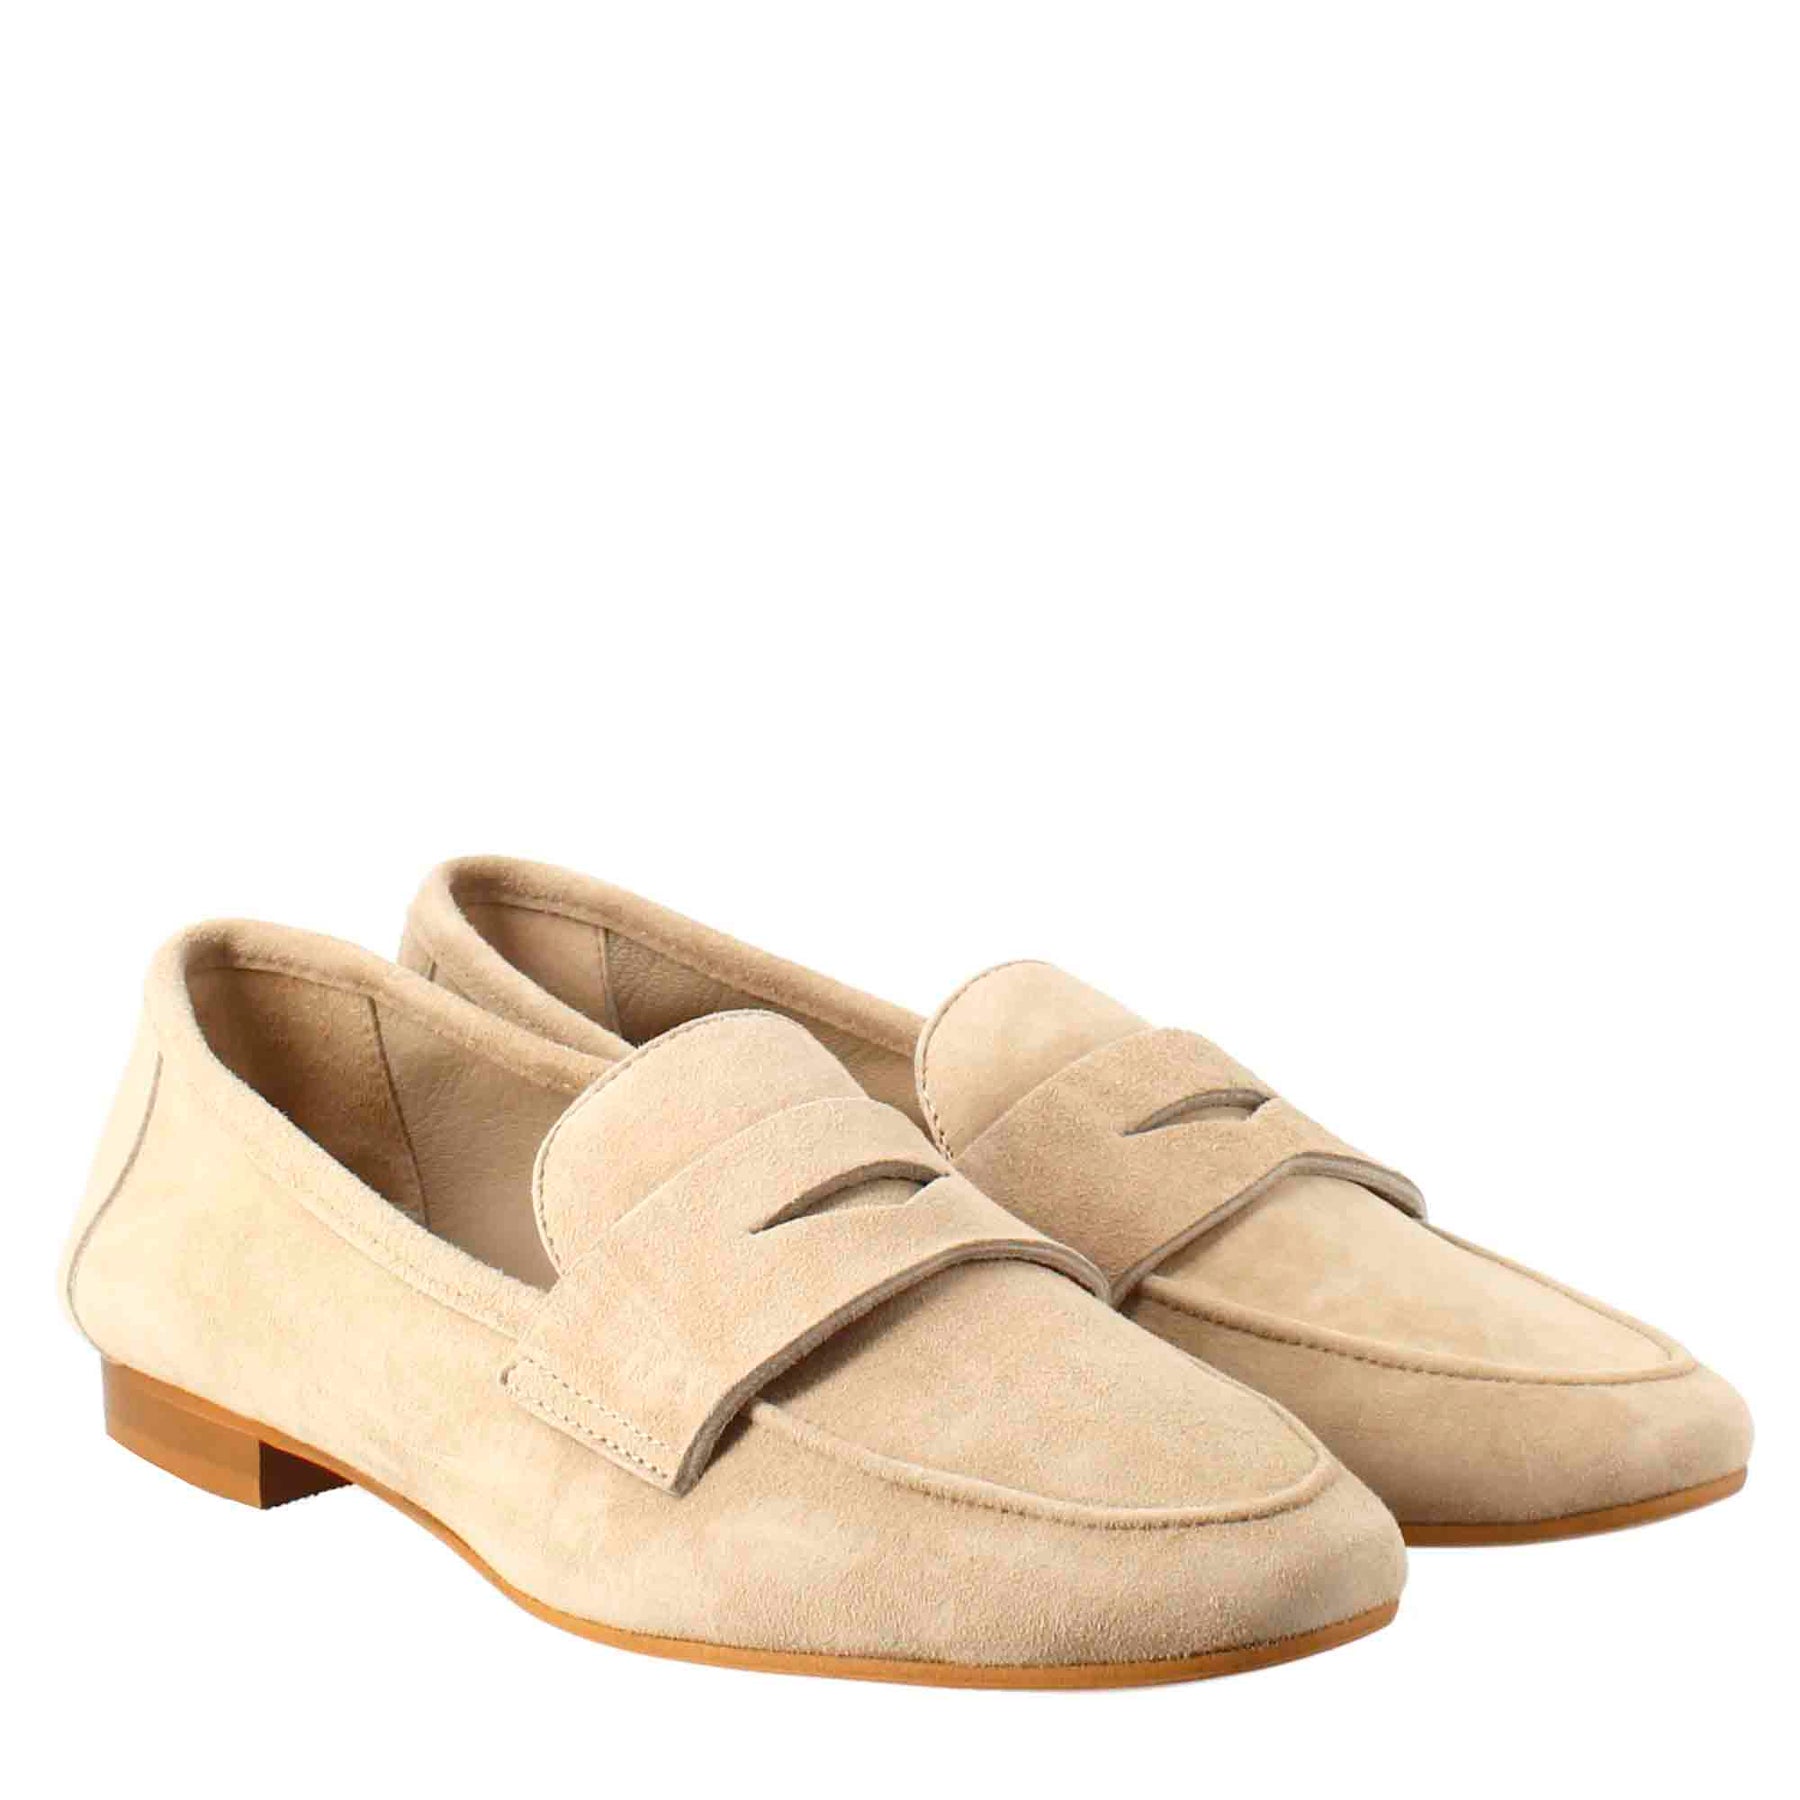 Flexible women's moccasin in taupe suede leather and rubber sole